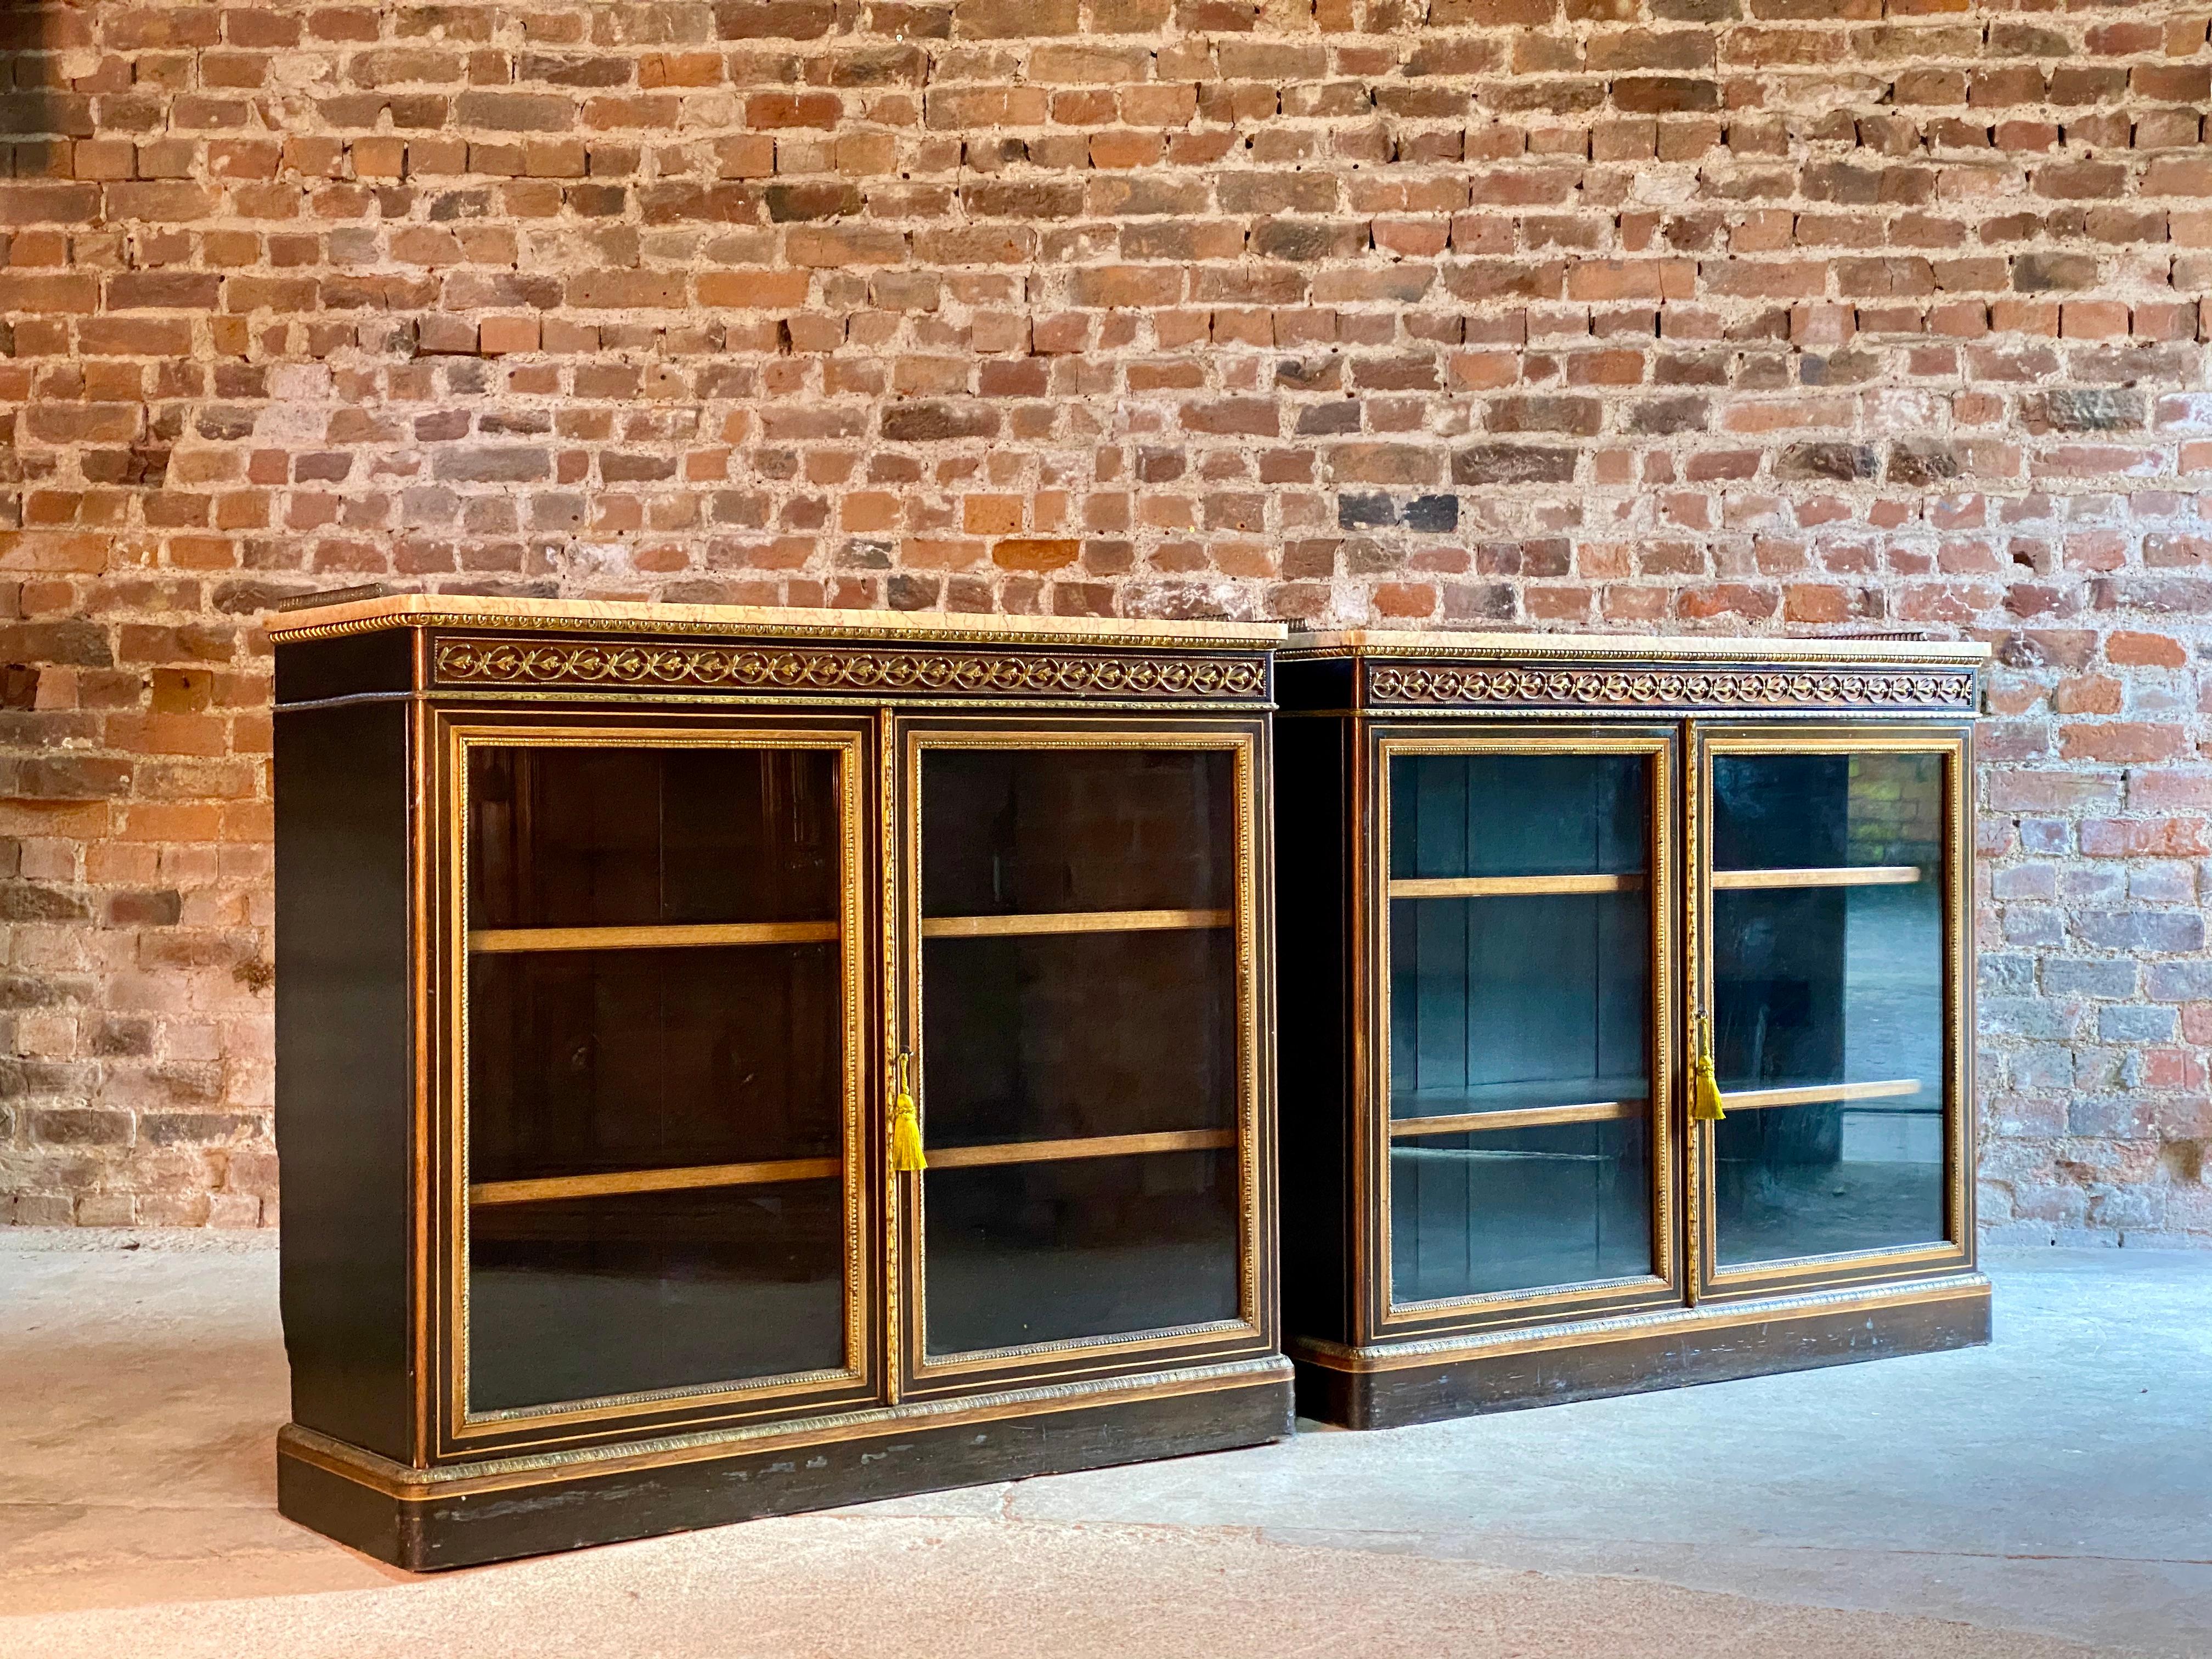 James Lamb of Manchester pair of ebonized, walnut and gilt metal mounted bookcase pier cabinets, circa 1850

A pair of important and rare matching pair of 19th century James Lamb of Manchester ebonized, walnut and gilt metal mounted pier cabinets